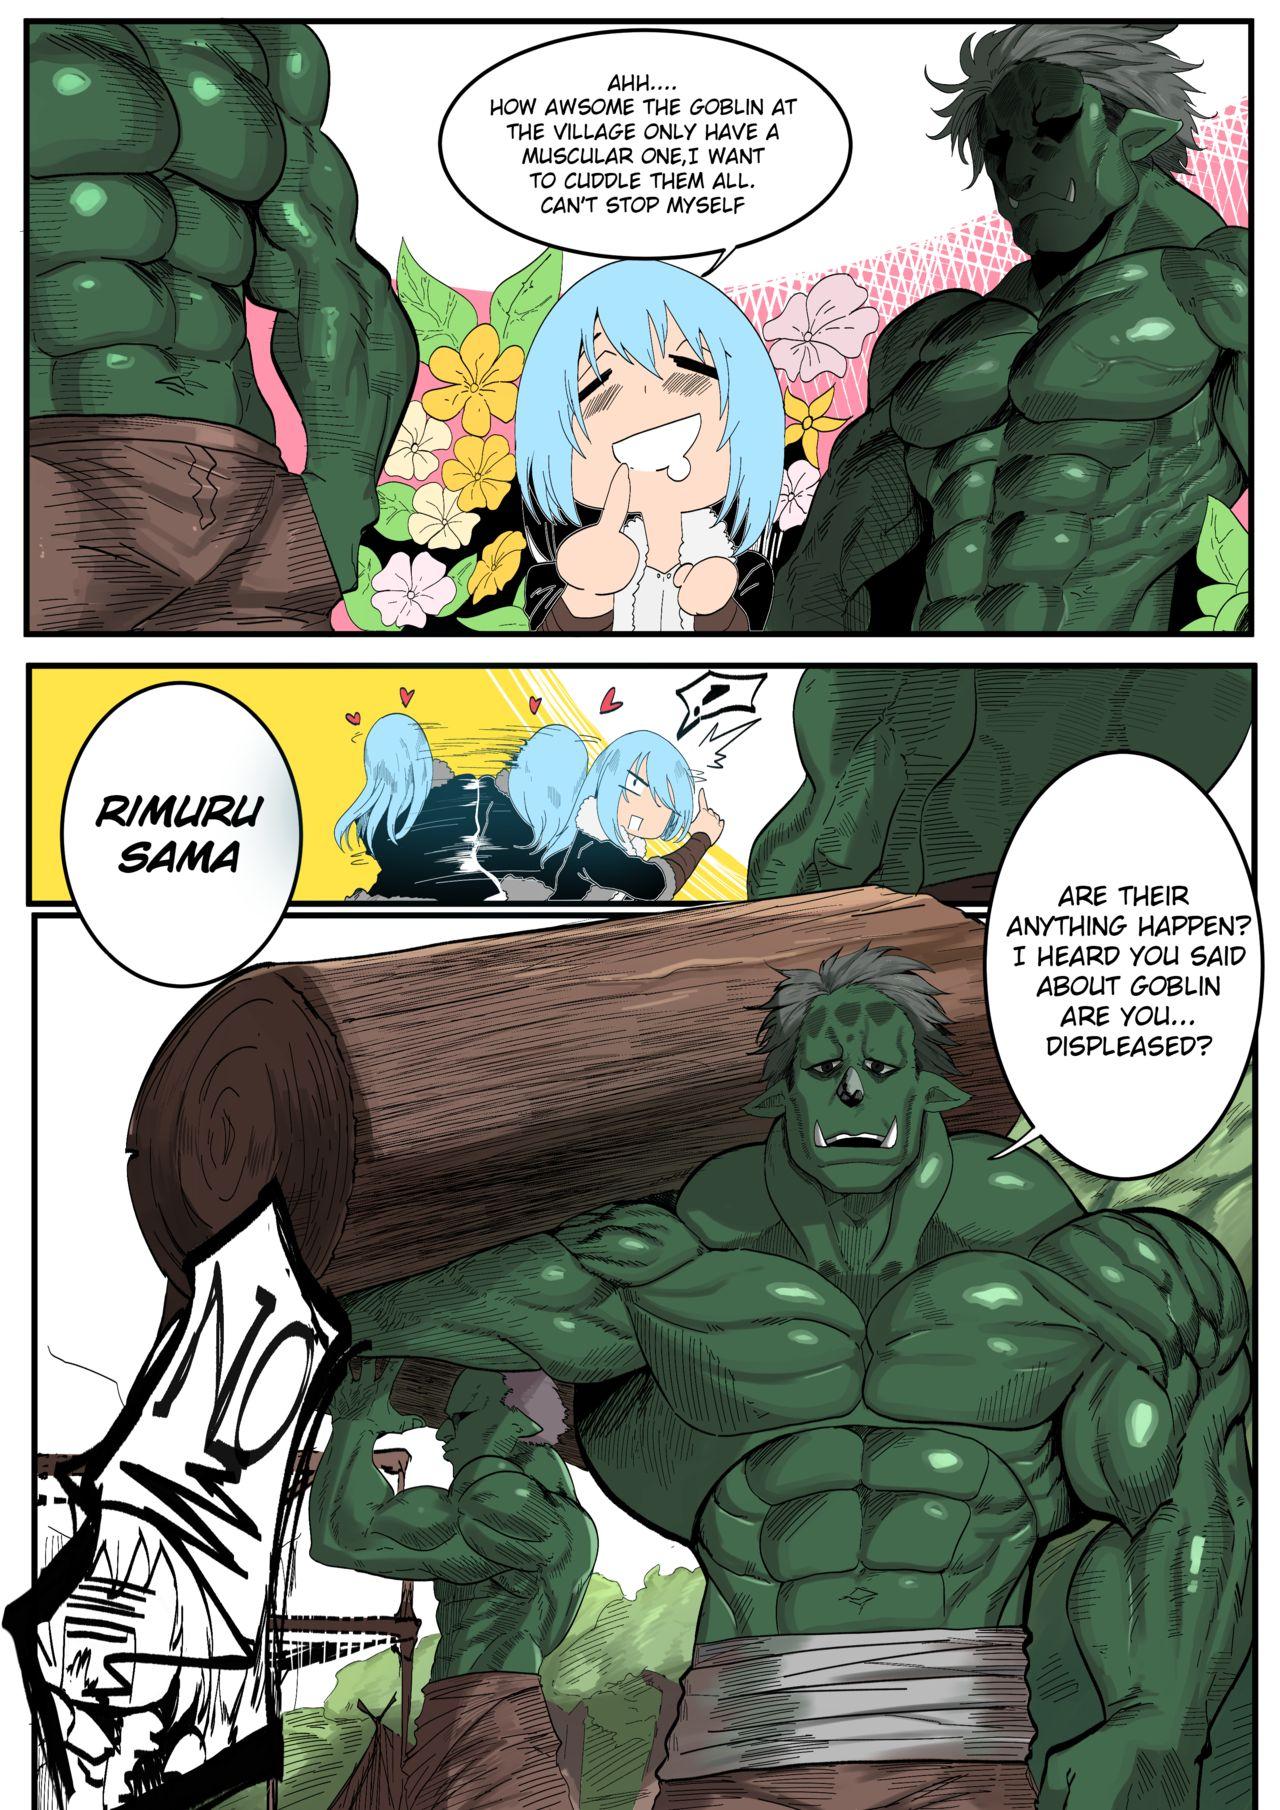 That Time I Got Reincarnated as a Bitchy Slime 4